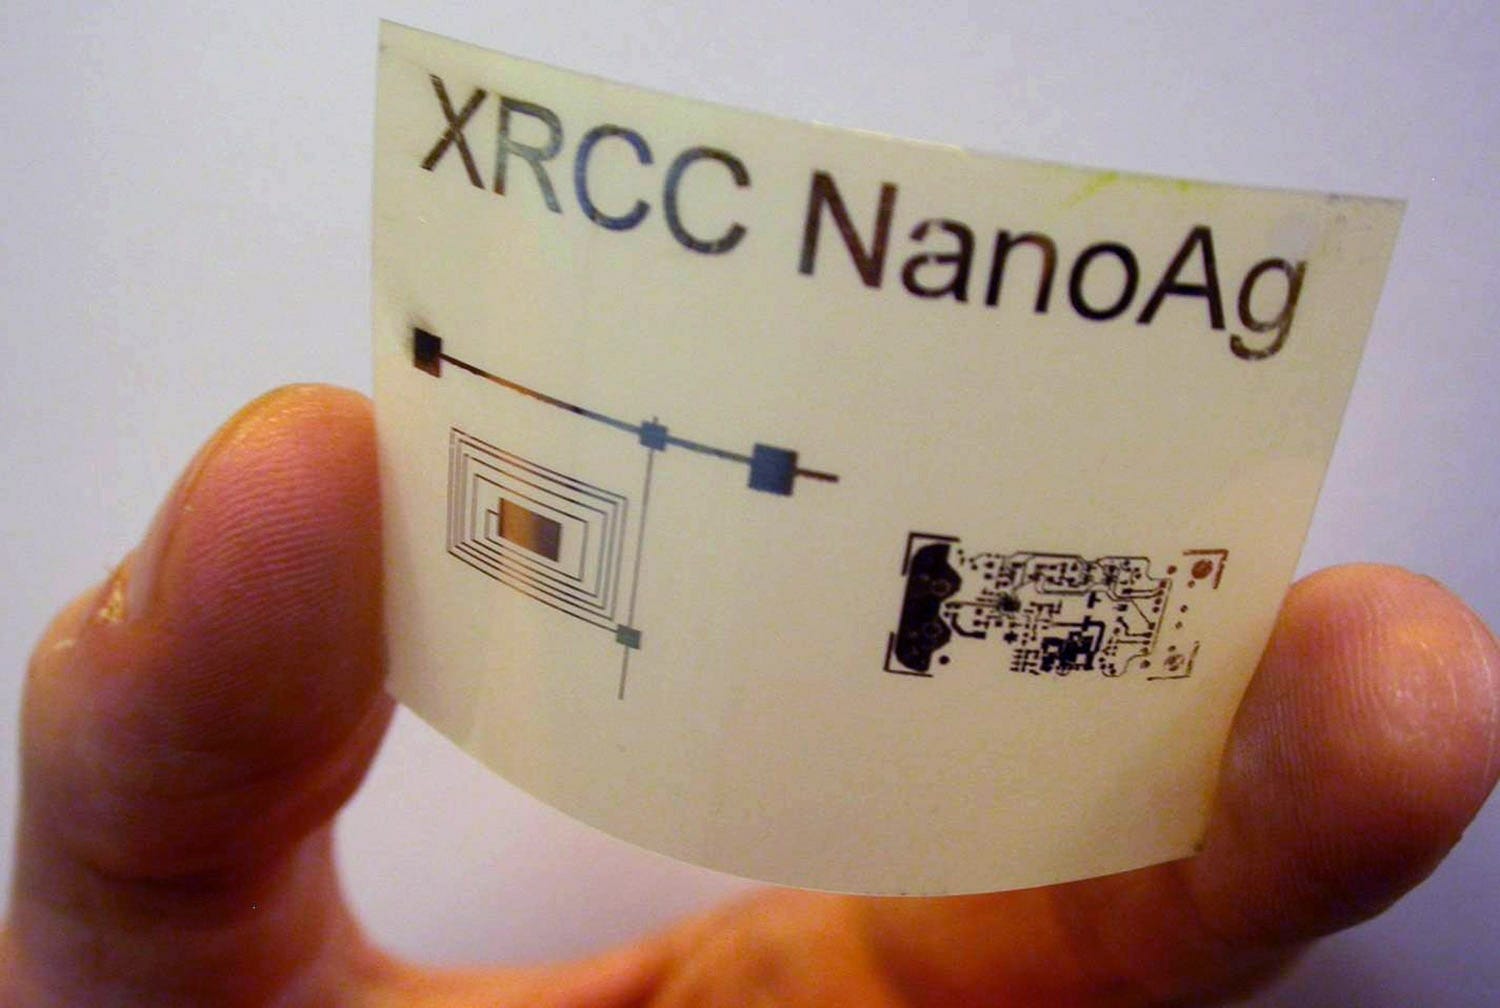 Xerox's process can print fine details of electronic circuitry on flexible plastic.